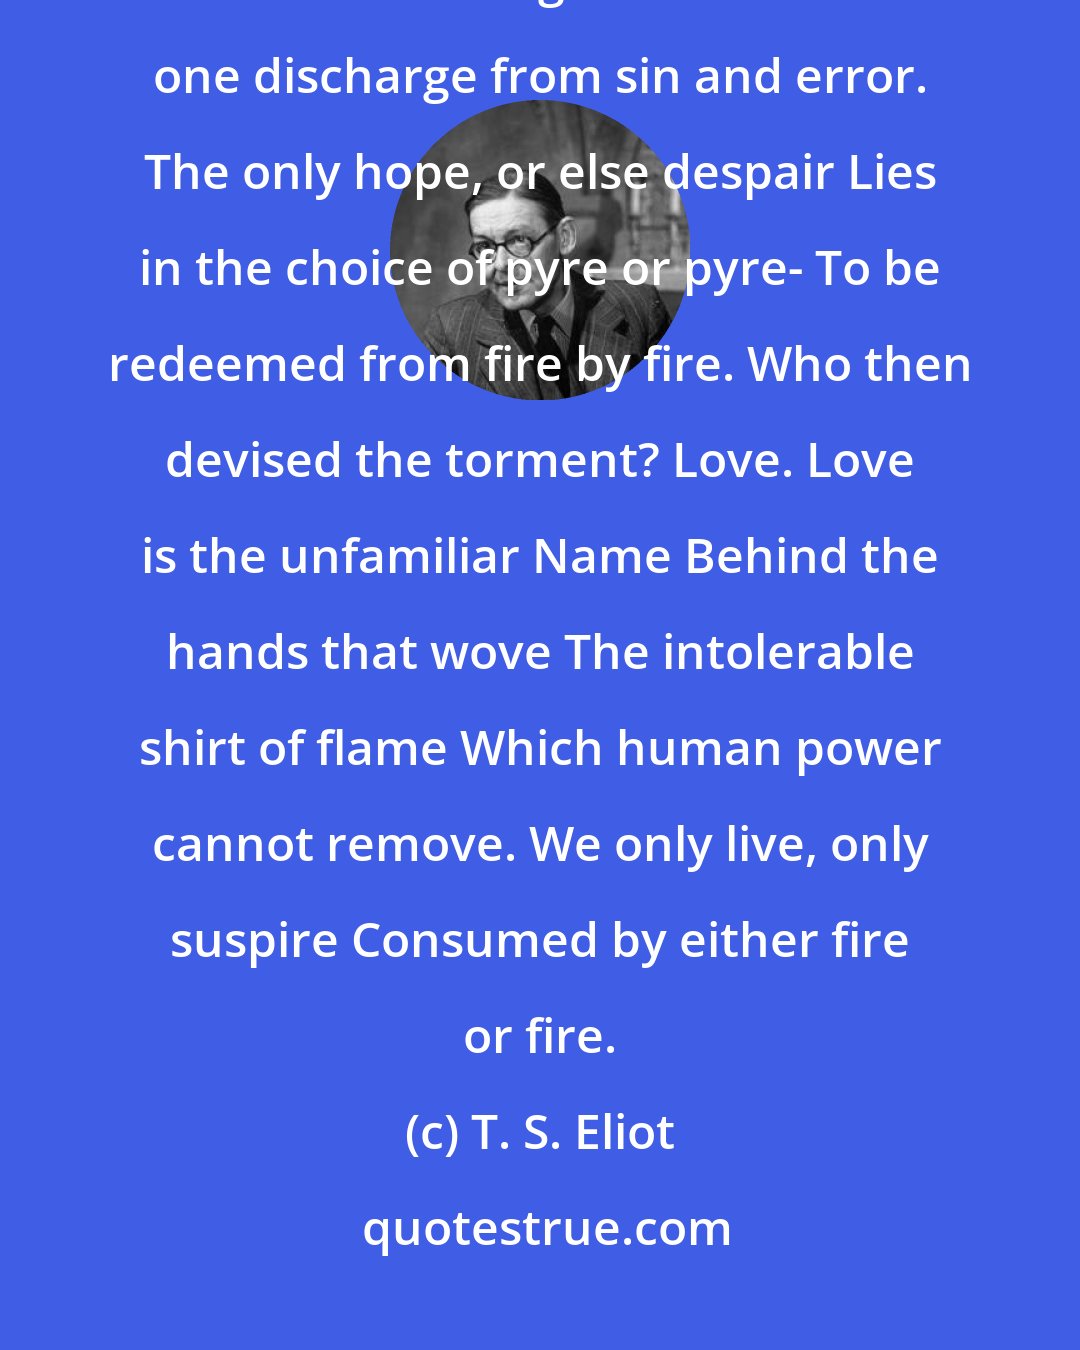 T. S. Eliot: The dove descending breaks the air With flame of incandescent terror Of which the tongues declare The one discharge from sin and error. The only hope, or else despair Lies in the choice of pyre or pyre- To be redeemed from fire by fire. Who then devised the torment? Love. Love is the unfamiliar Name Behind the hands that wove The intolerable shirt of flame Which human power cannot remove. We only live, only suspire Consumed by either fire or fire.